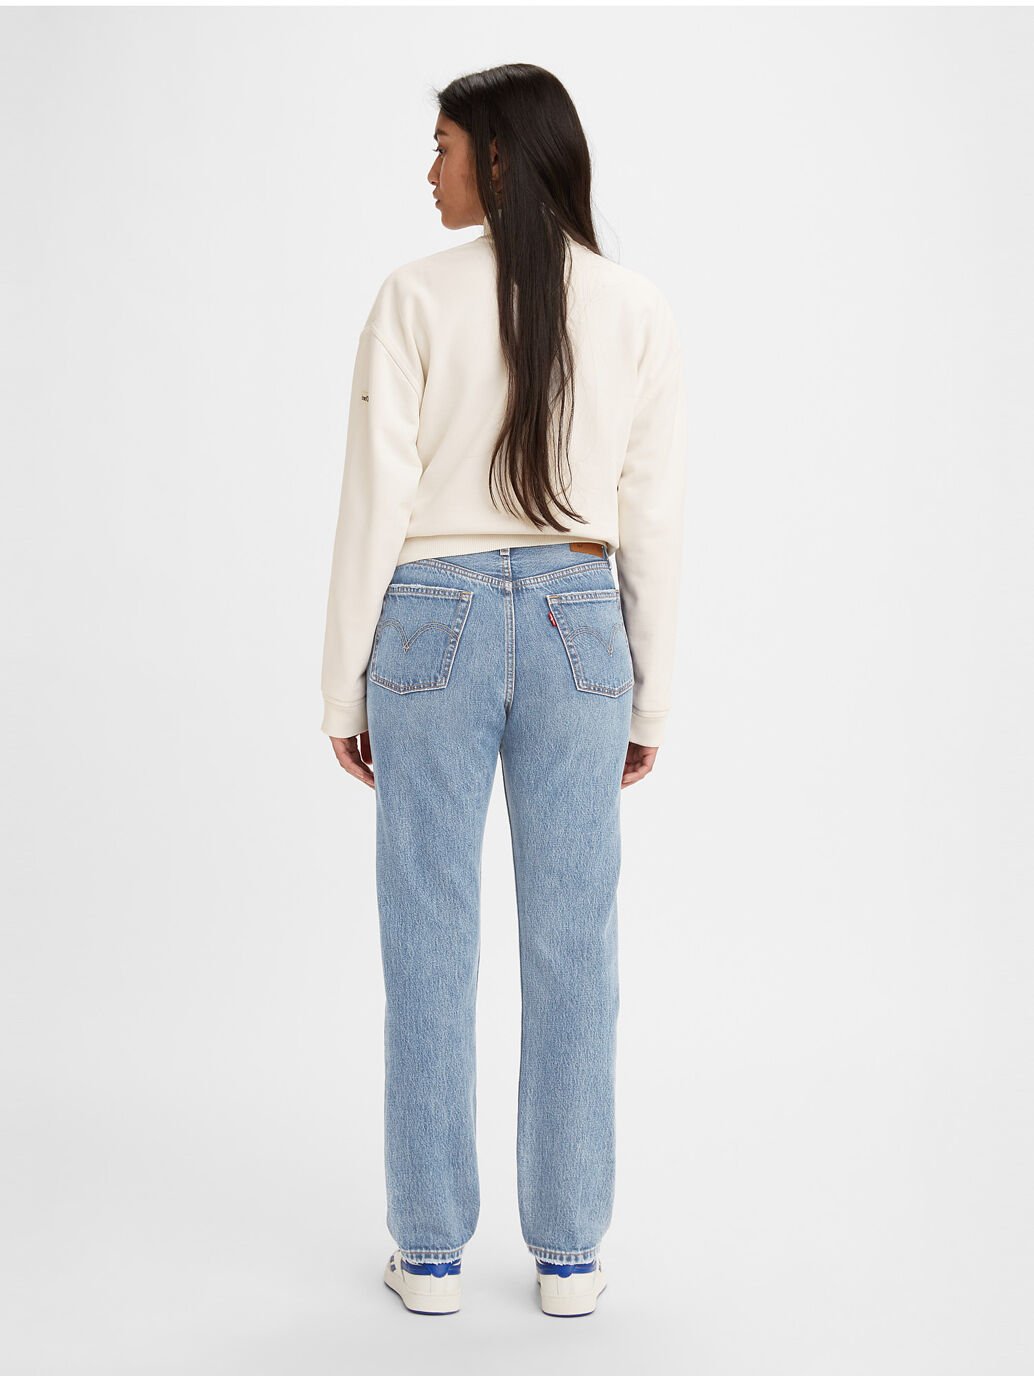 Levi's | 501 Jeans For Women - Hollow Days